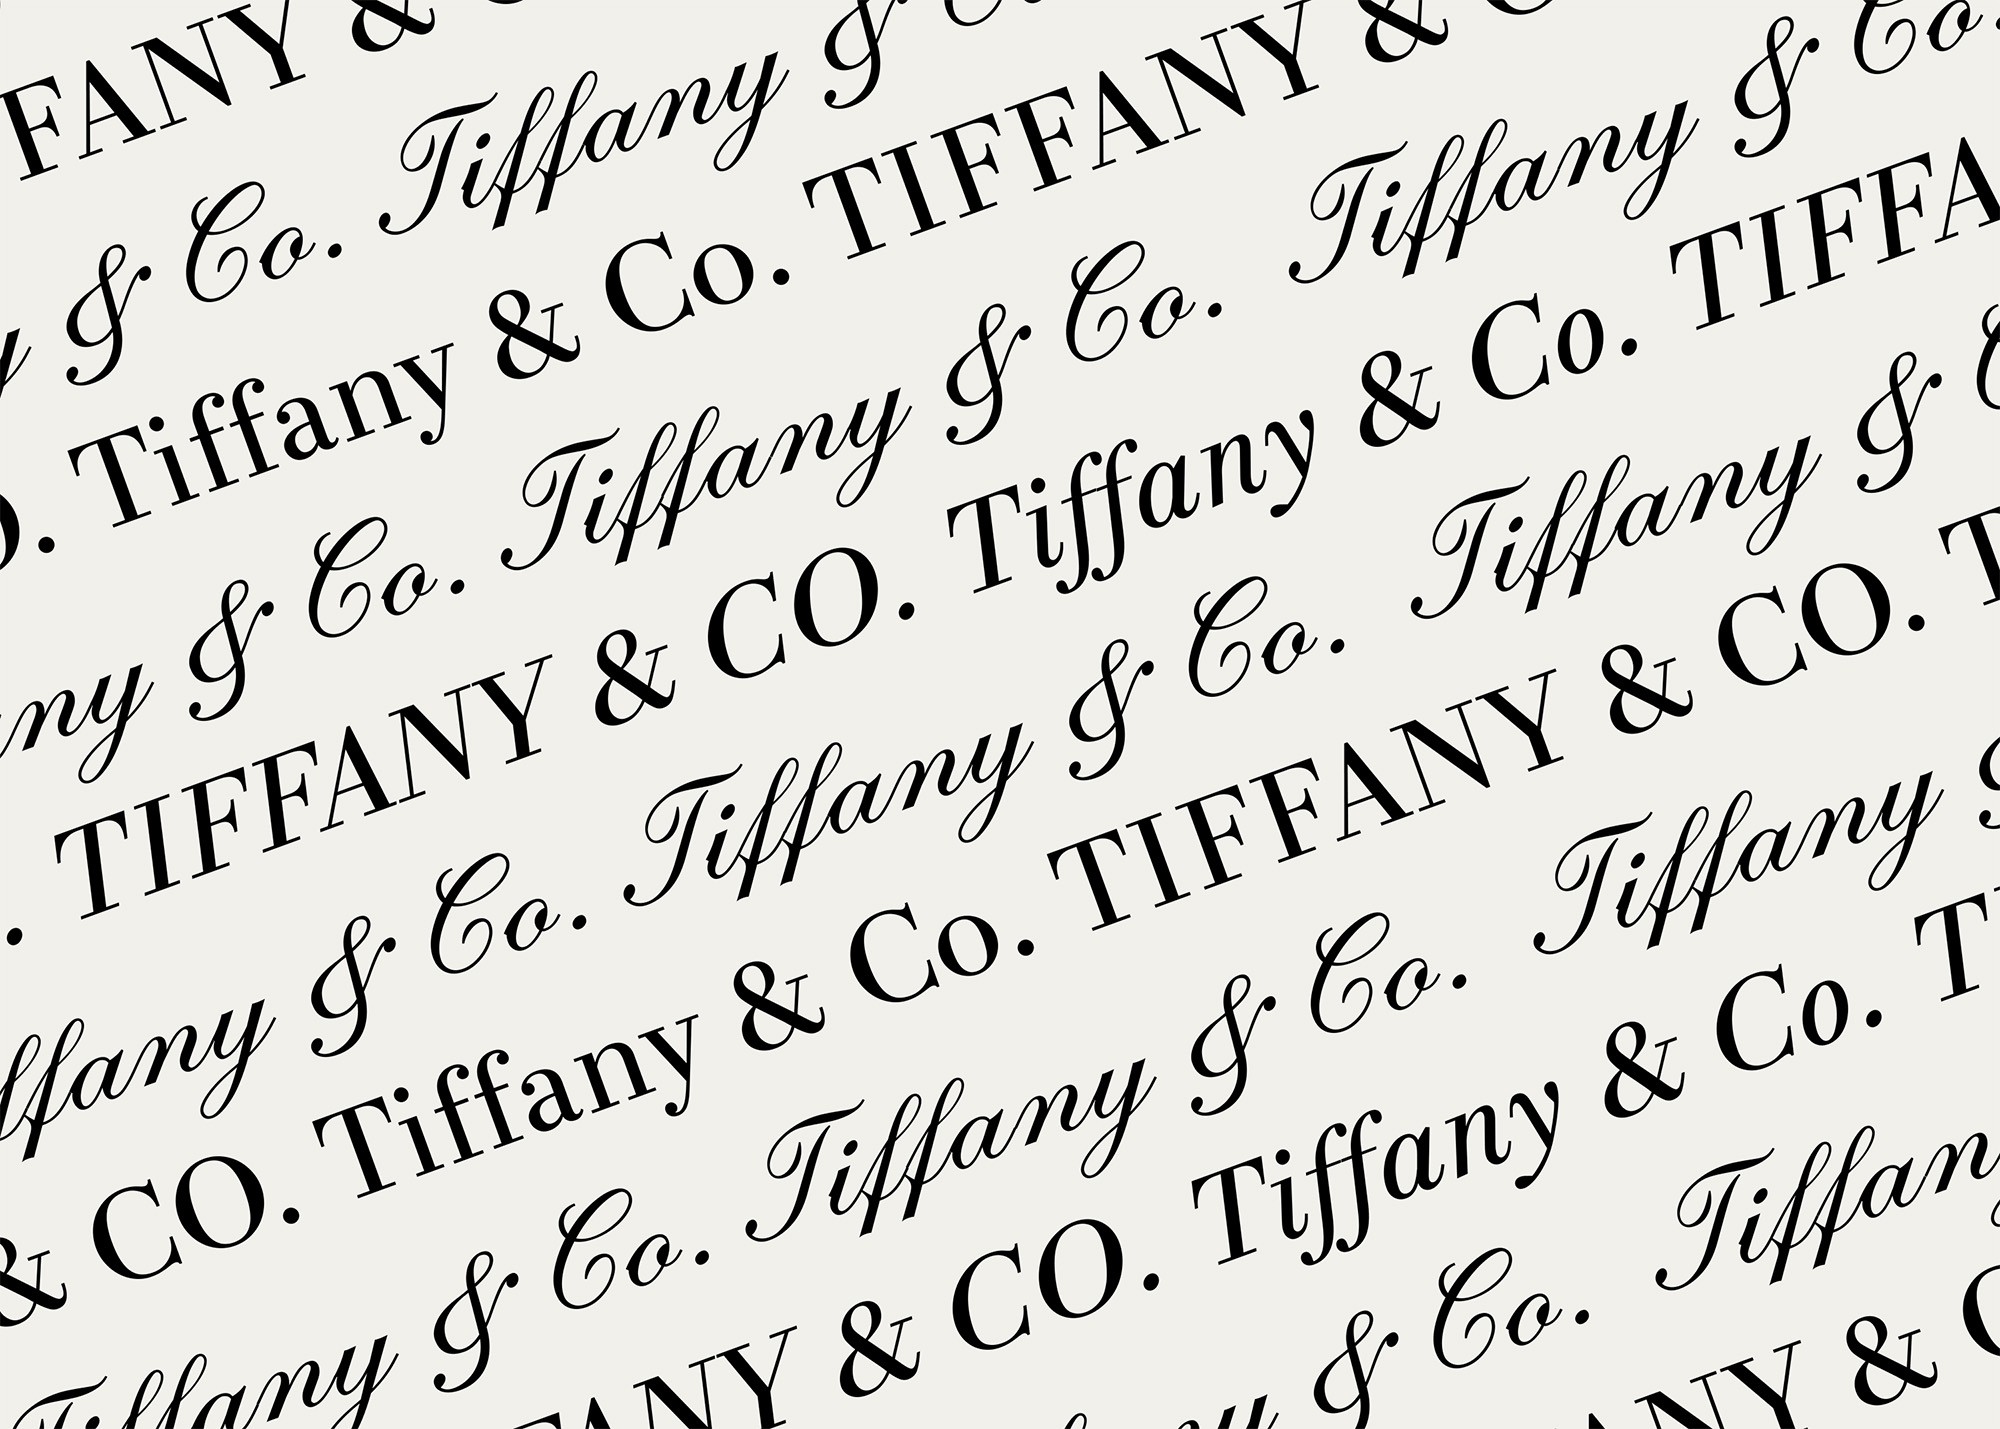 A look into the font used . . ., Tiffany & Co.